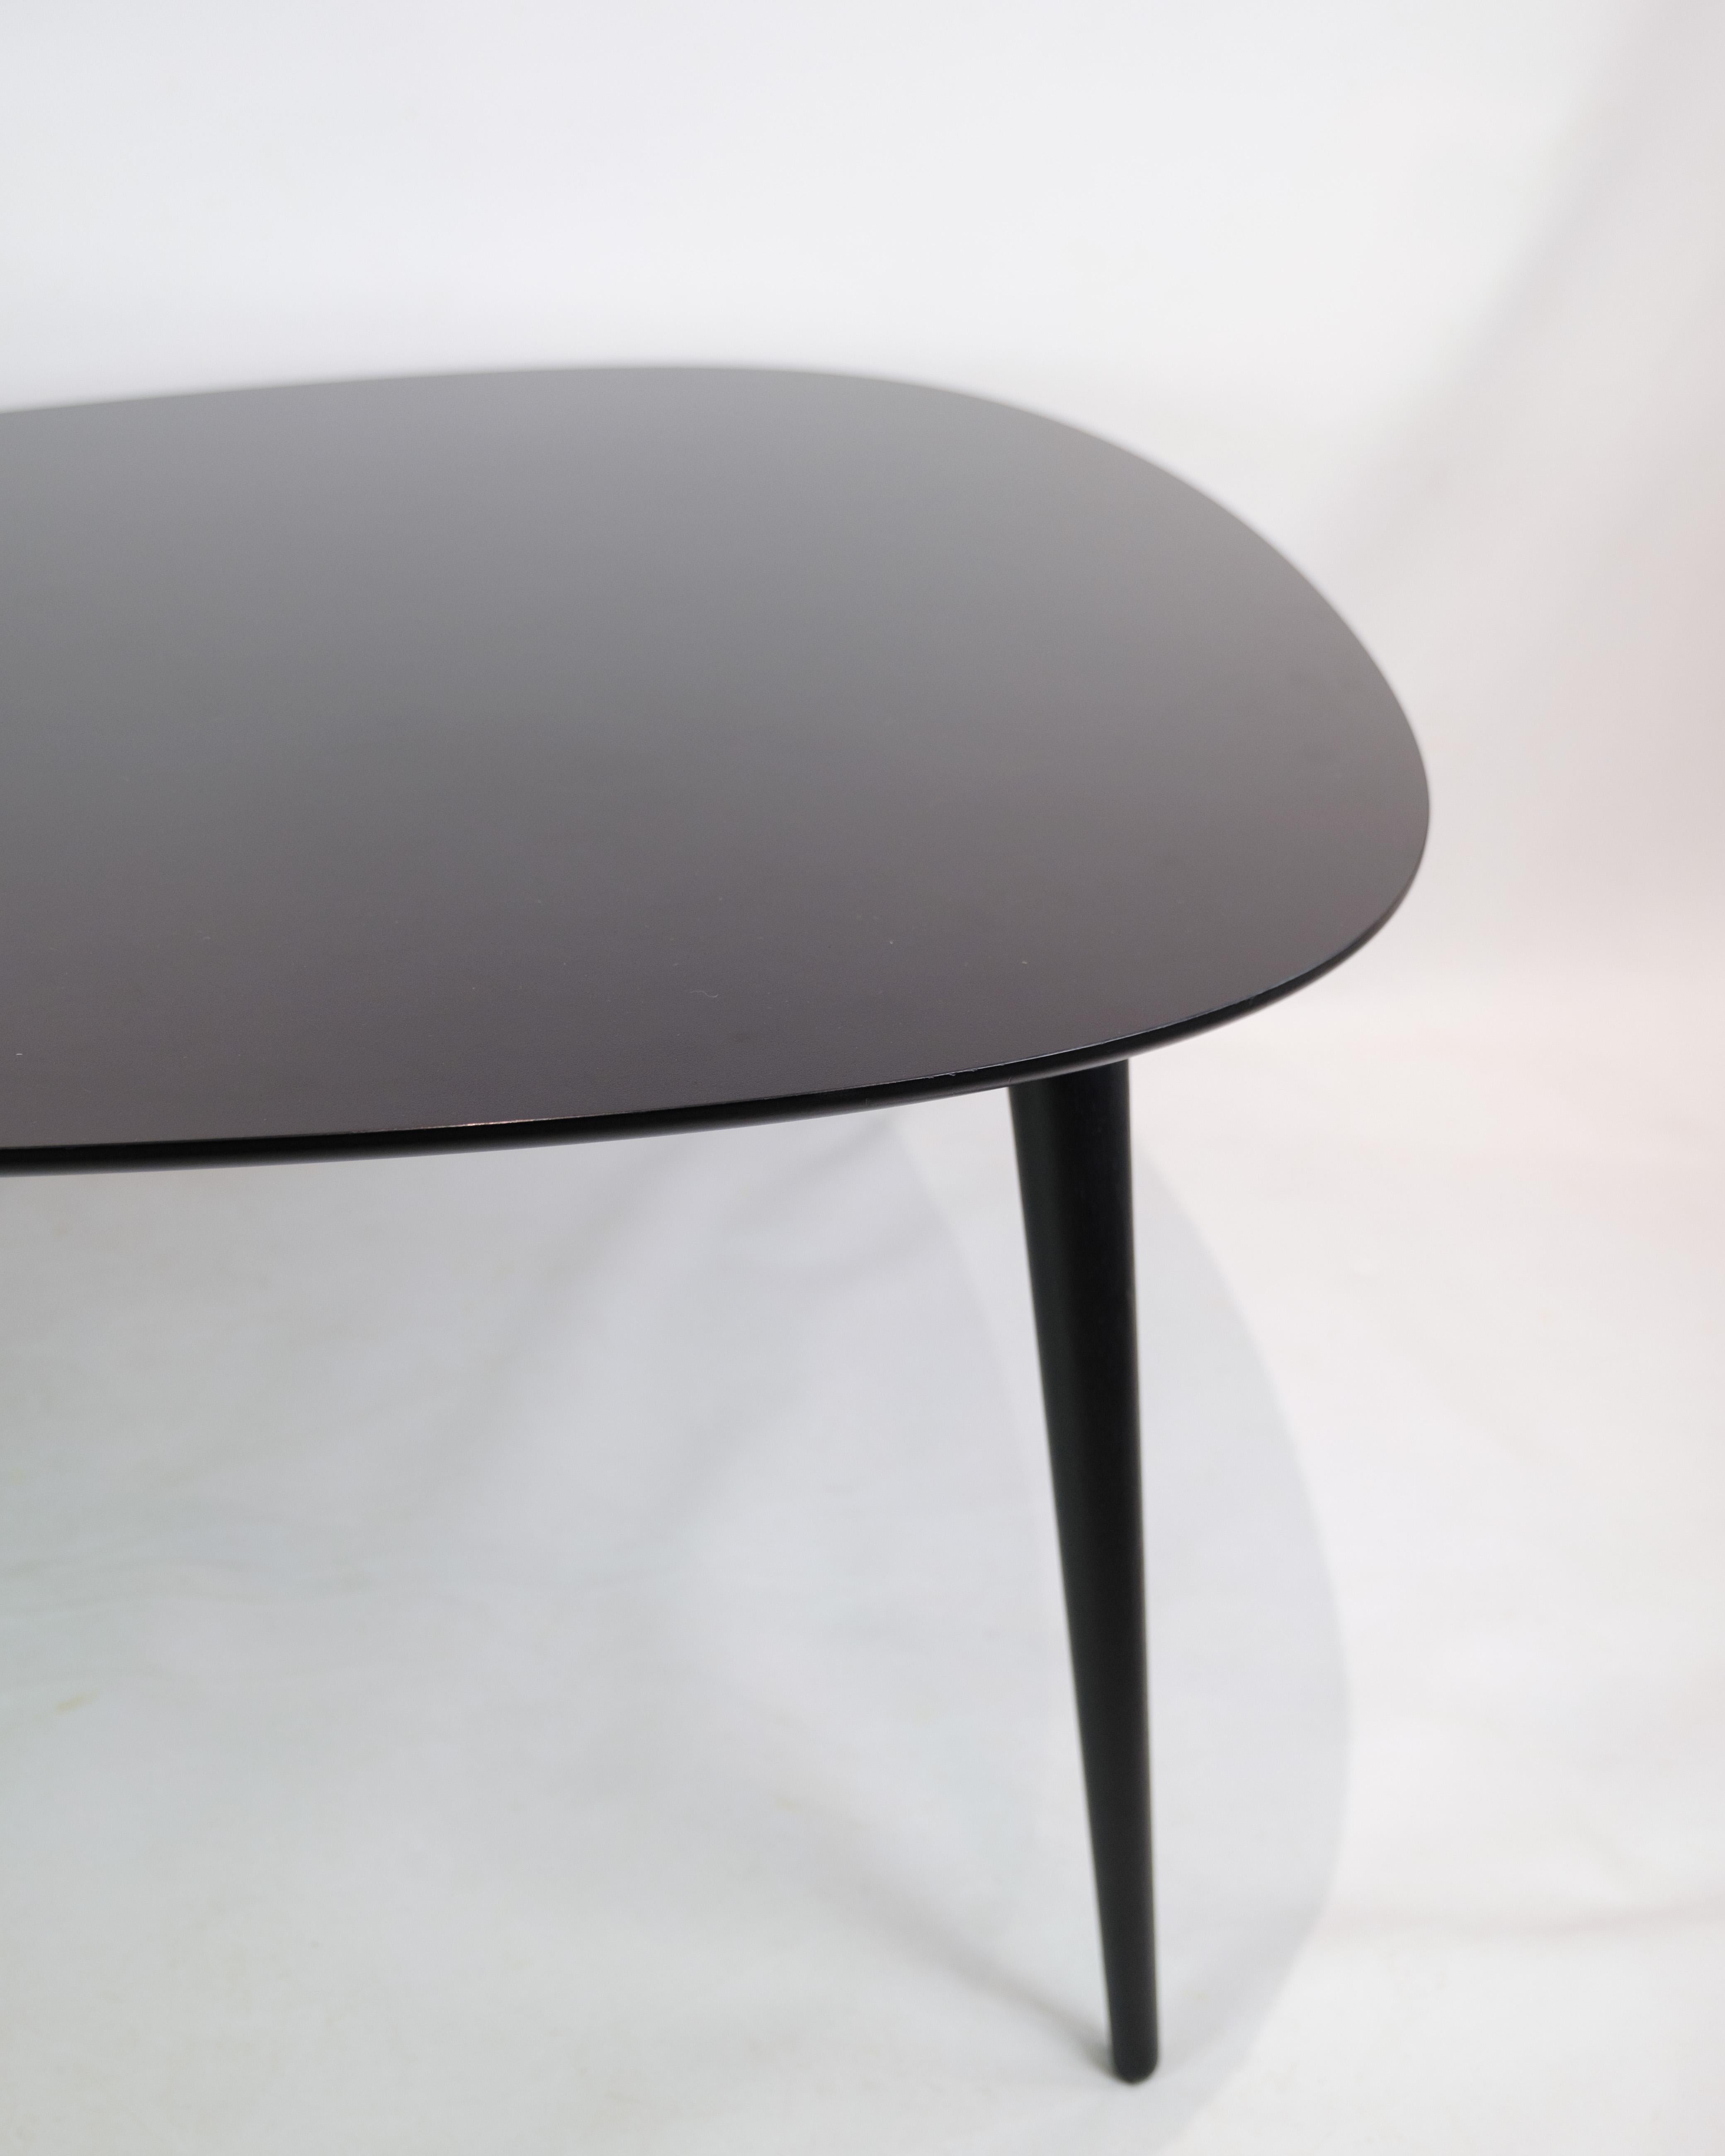 Mid-Century Modern Coffee table In Black Laminate With Oak legs, Made By Fredericia Furniture